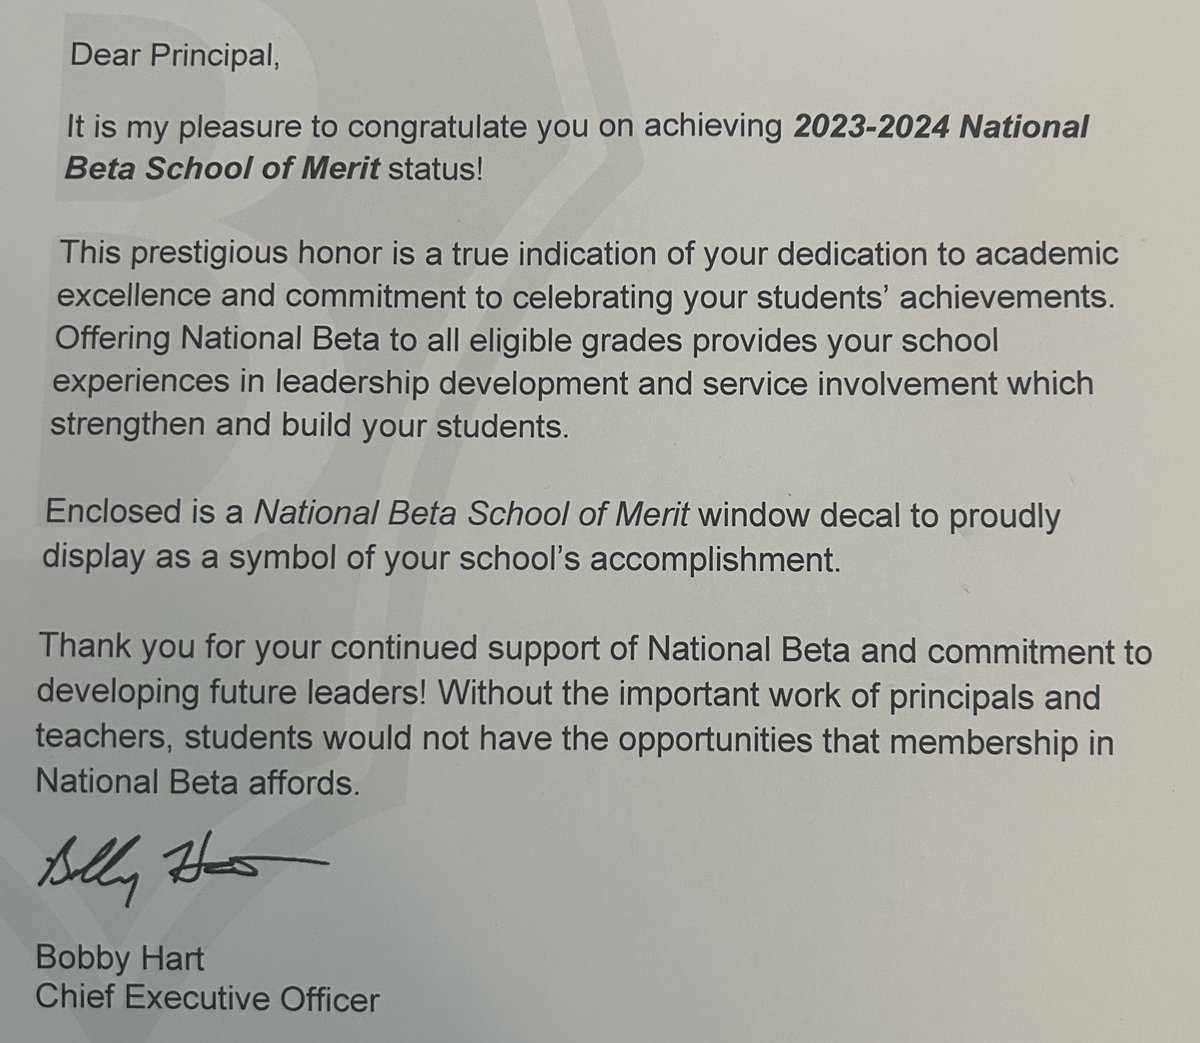 🏅We're thrilled to share that our school has been awarded National Beta School of Merit status 🌟 It's a testament to the hard work and dedication of our students, teachers, and staff. Let's continue to strive for greatness together! #Beta #ExcellenceInEducation